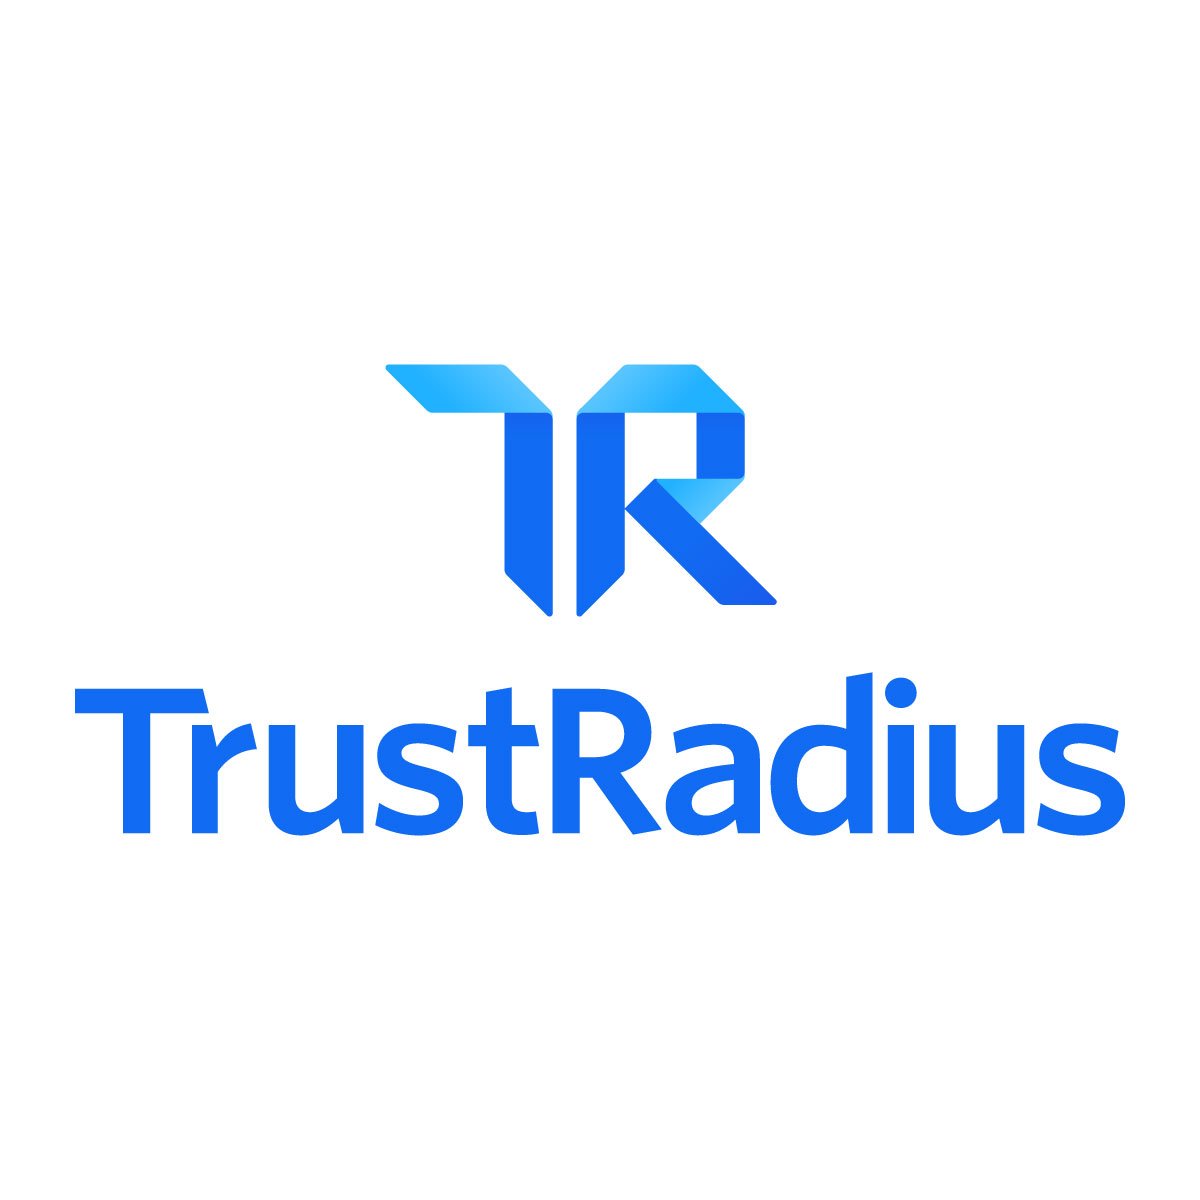 Comindware Tracker got to the Top Workflow Management Software at Trustradius